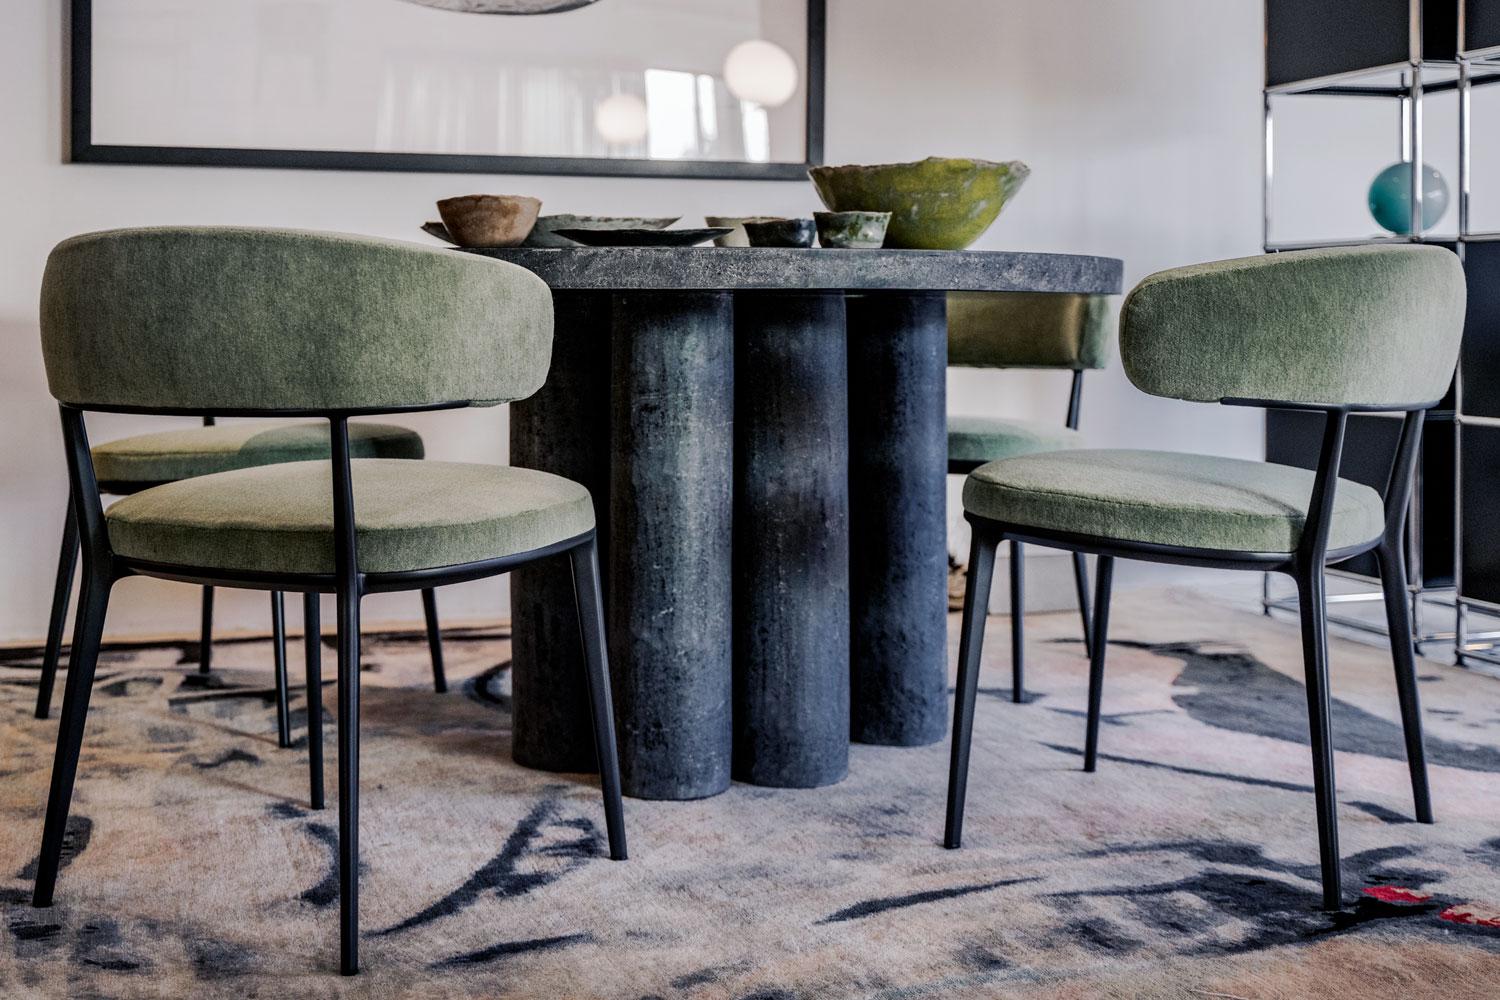 Italian Caratos Dining Chairs in Sage-colored Velvet by Maxalto - Available Now